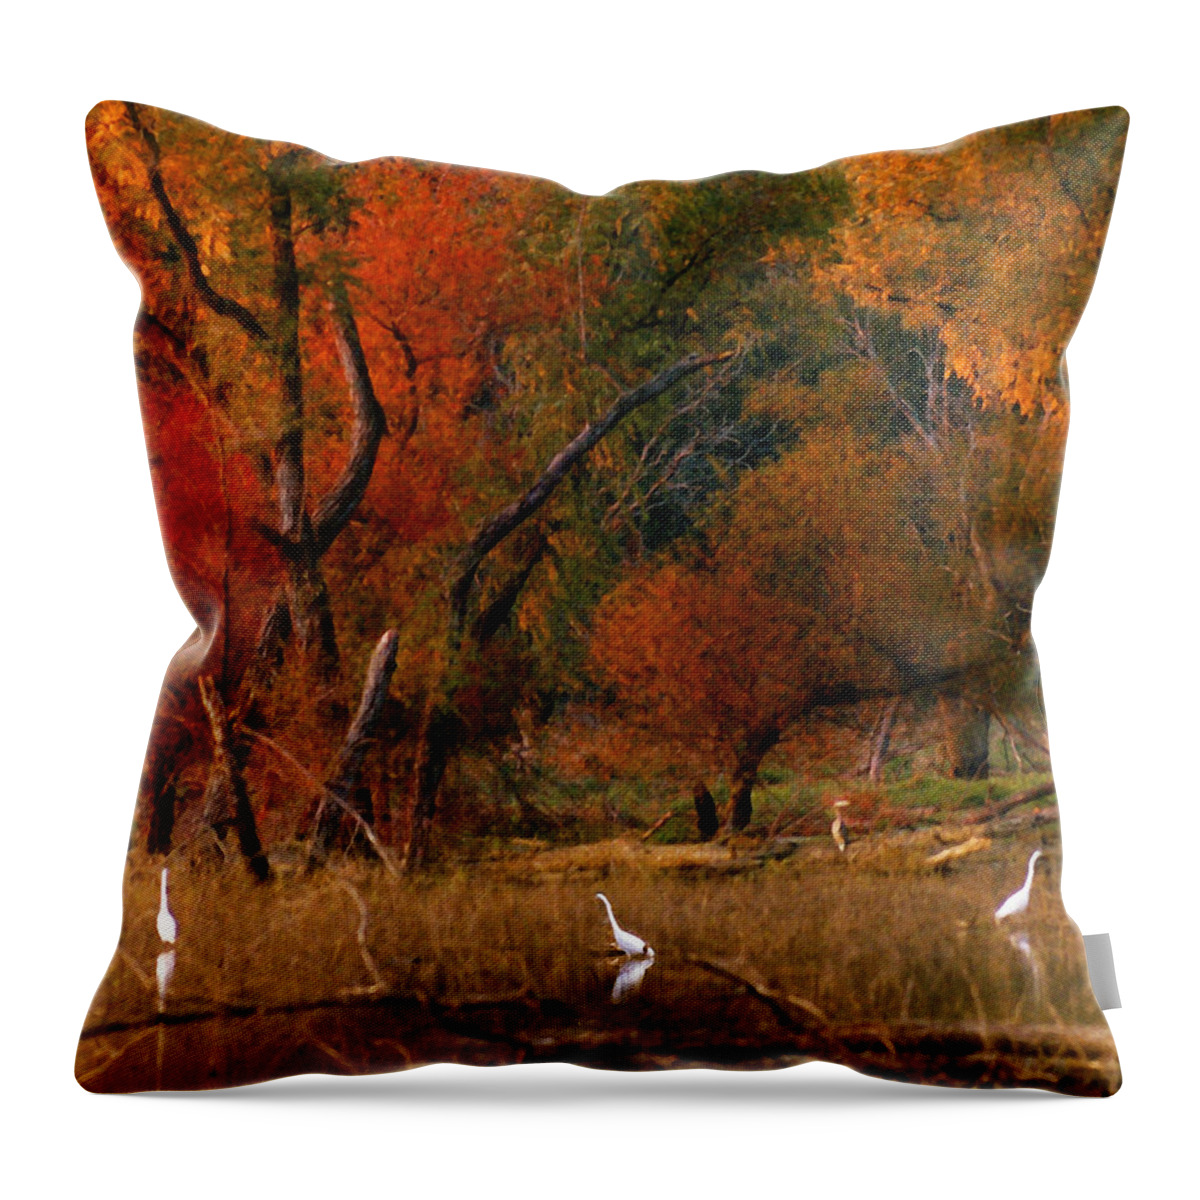 Landscape Throw Pillow featuring the photograph Squaw Creek Egrets by Steve Karol